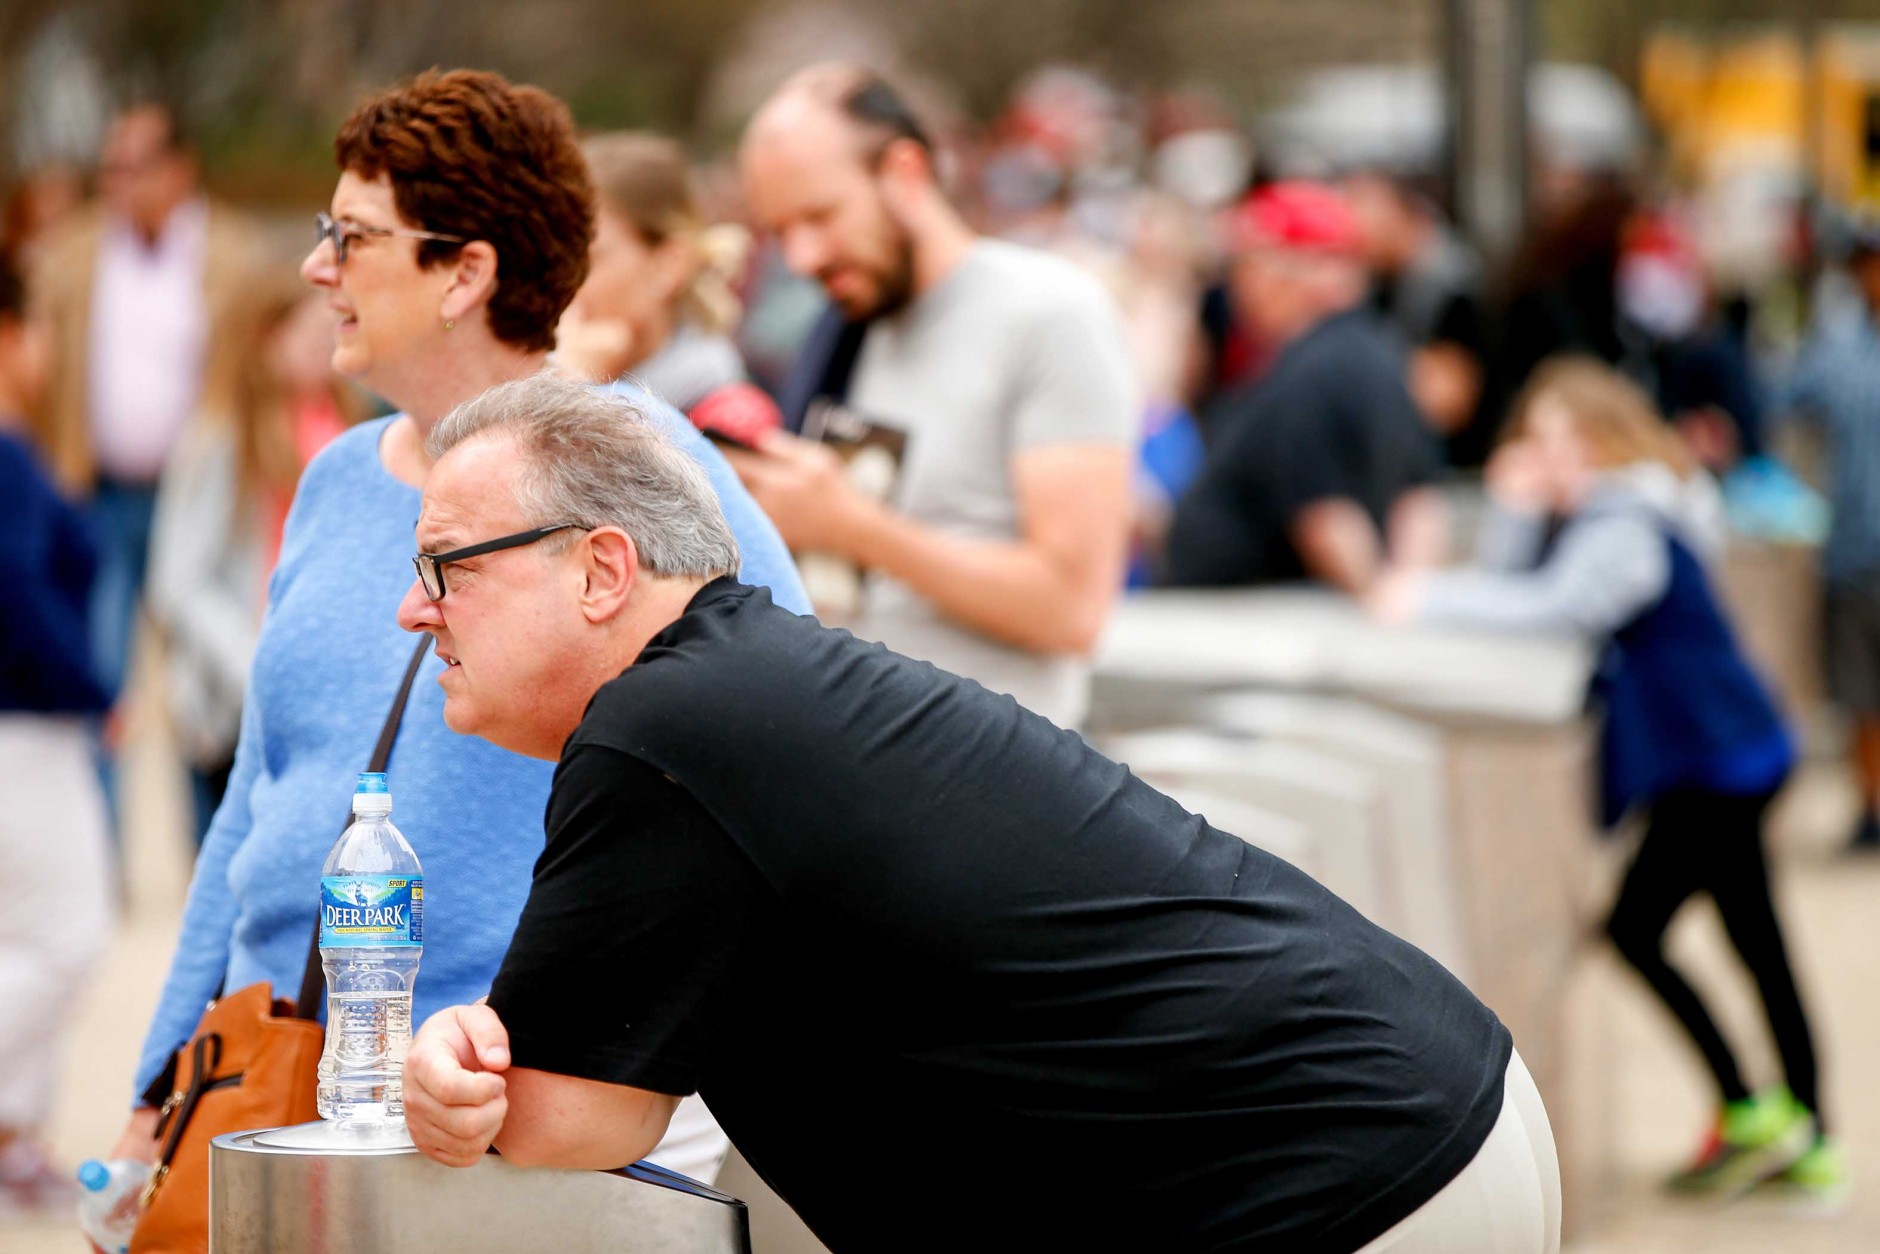 Michael and Julie Krieger of Poughkeepsie, N.Y. wait outside the Smithsonian's National Air and Space Museum for it to reopen after widespread power outages cause many of the buildings along the National Mall in Washington to shut down temporarily, Tuesday, April 7, 2015. Widespread power outages affected the White House, State Department, Capitol and other sites across Washington and its suburbs Tuesday afternoon — all because of an explosion at a power plant in southern Maryland, an official said.  (AP Photo/Andrew Harnik)